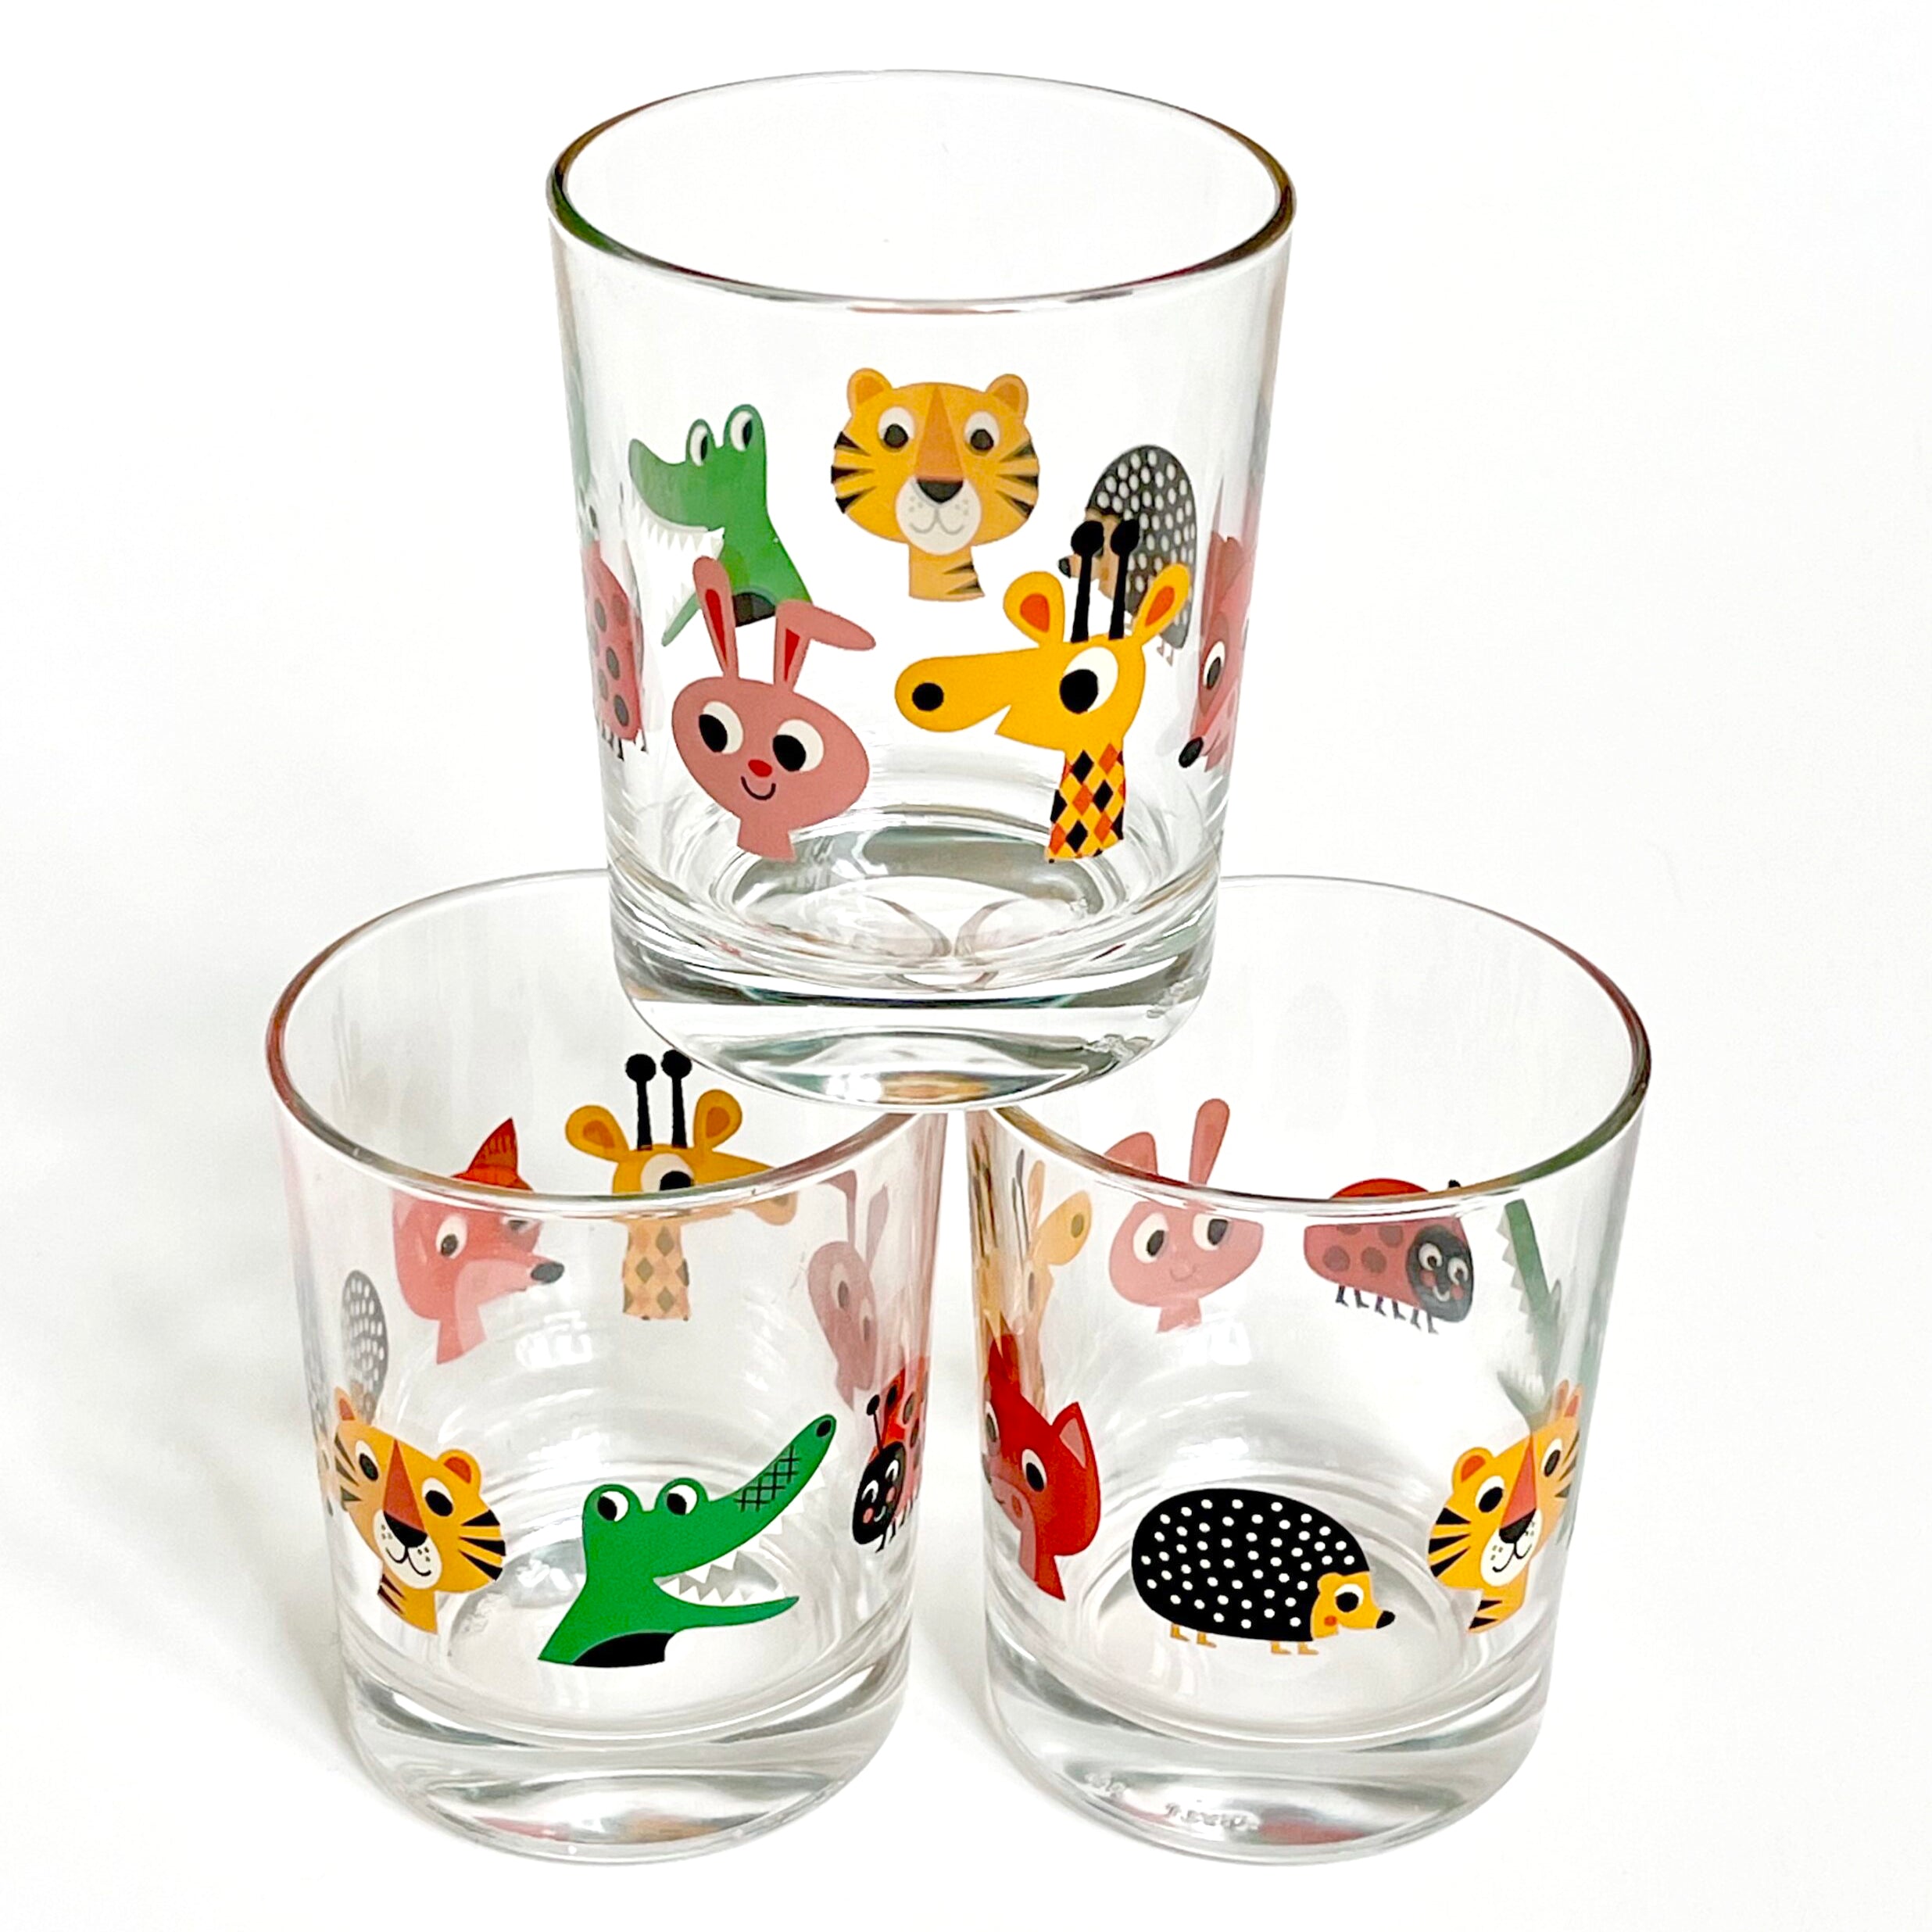 Glass with animals